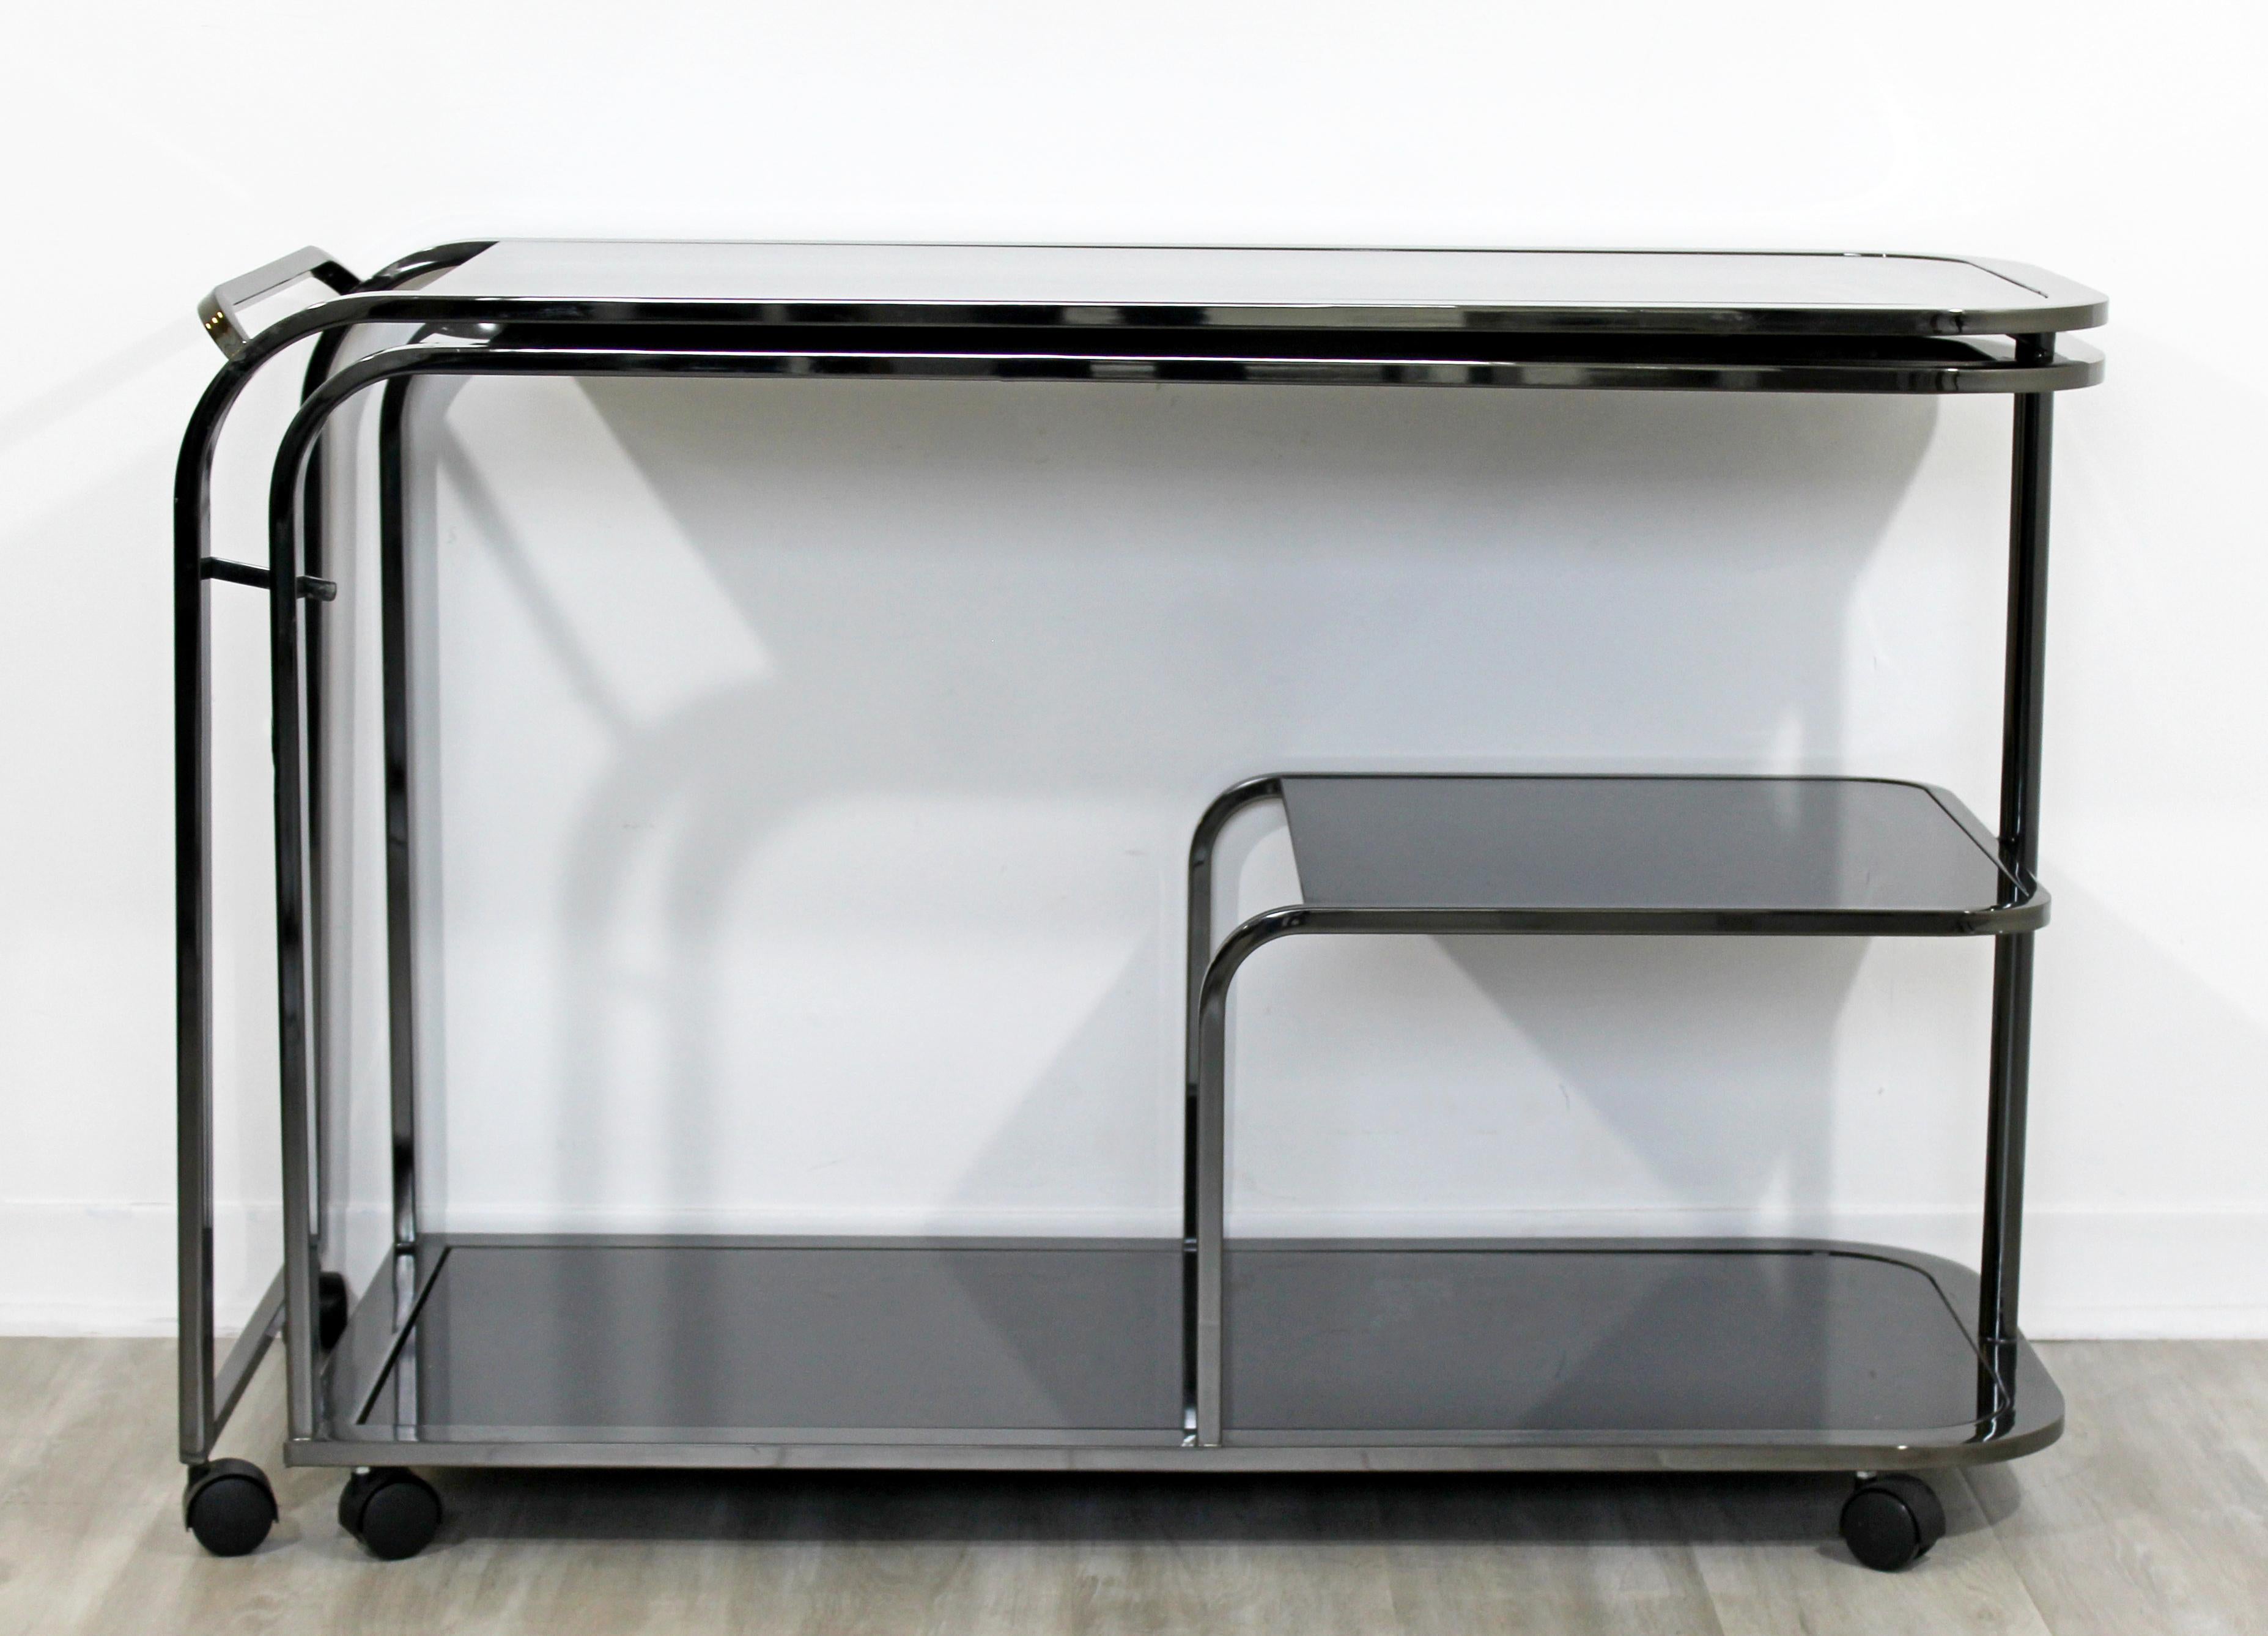 For your consideration is an incredible, expandable, rolling bar or service cart, with three glass tops, by The Design Institute of America, circa the 1970s. In excellent vintage condition. The dimensions are 45